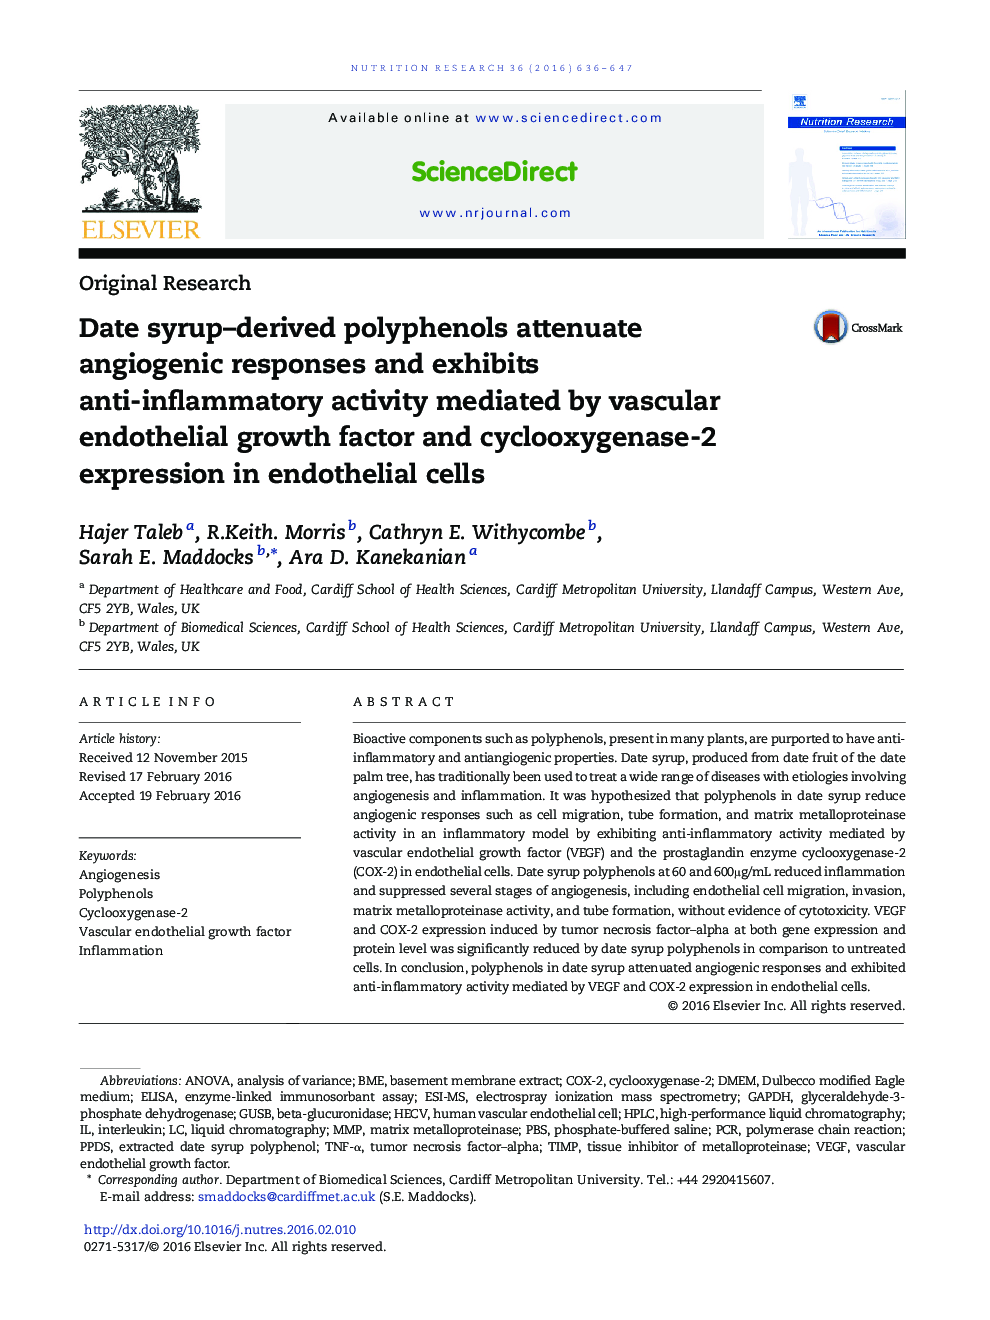 Date syrup–derived polyphenols attenuate angiogenic responses and exhibits anti-inflammatory activity mediated by vascular endothelial growth factor and cyclooxygenase-2 expression in endothelial cells